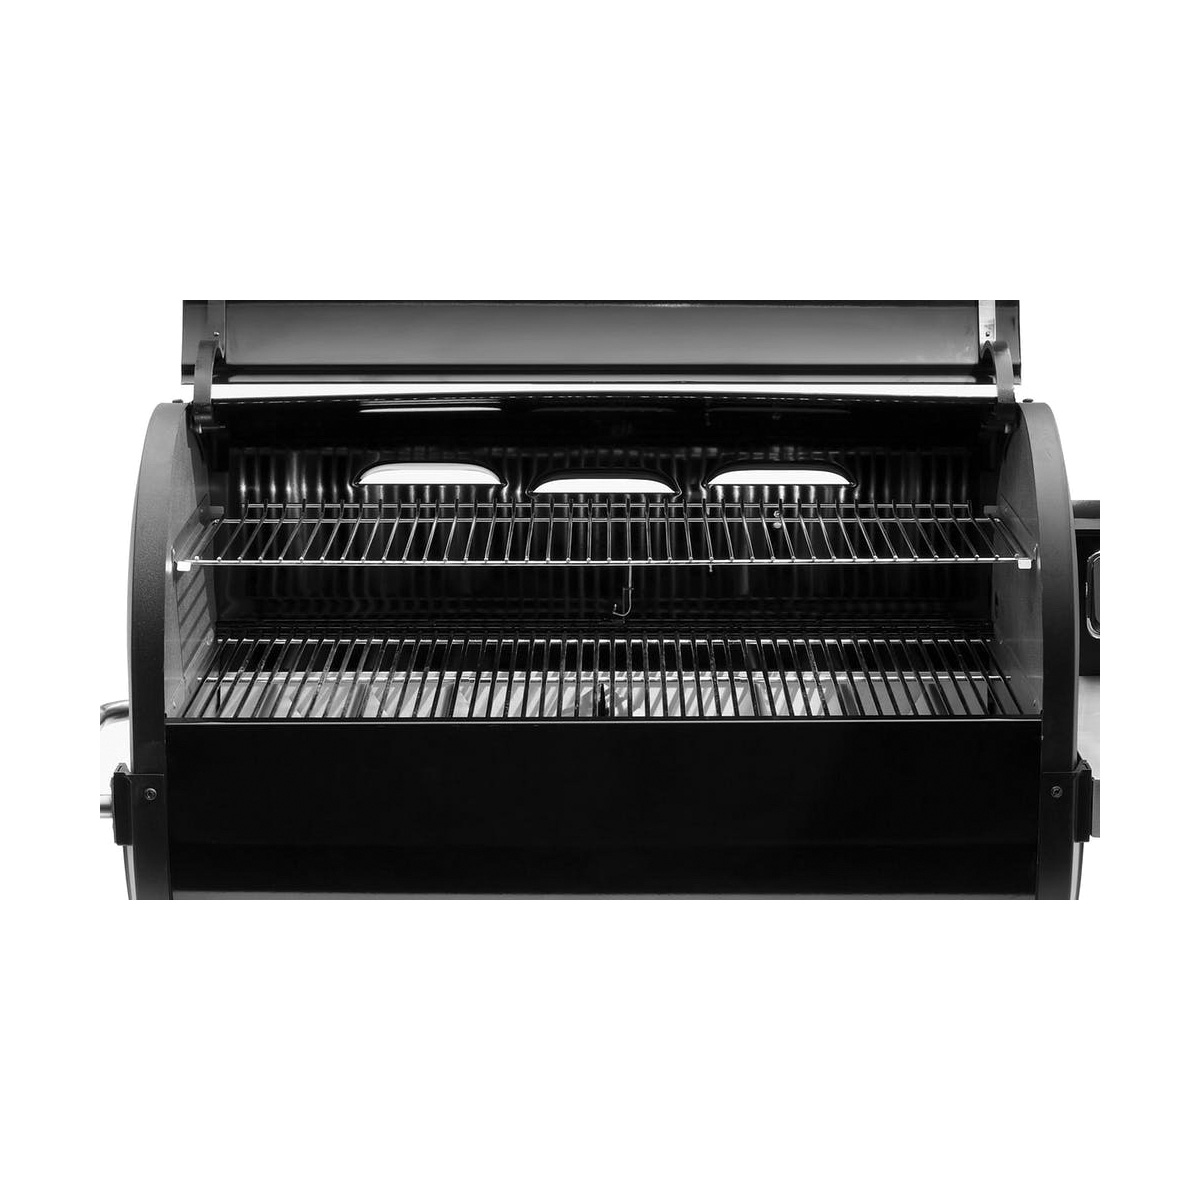 Weber SmokeFire 23510001 Pellet Grill, 1008 sq-in Primary Cooking Surface, Side Shelf Included: Yes, Steel Body, Black - 5